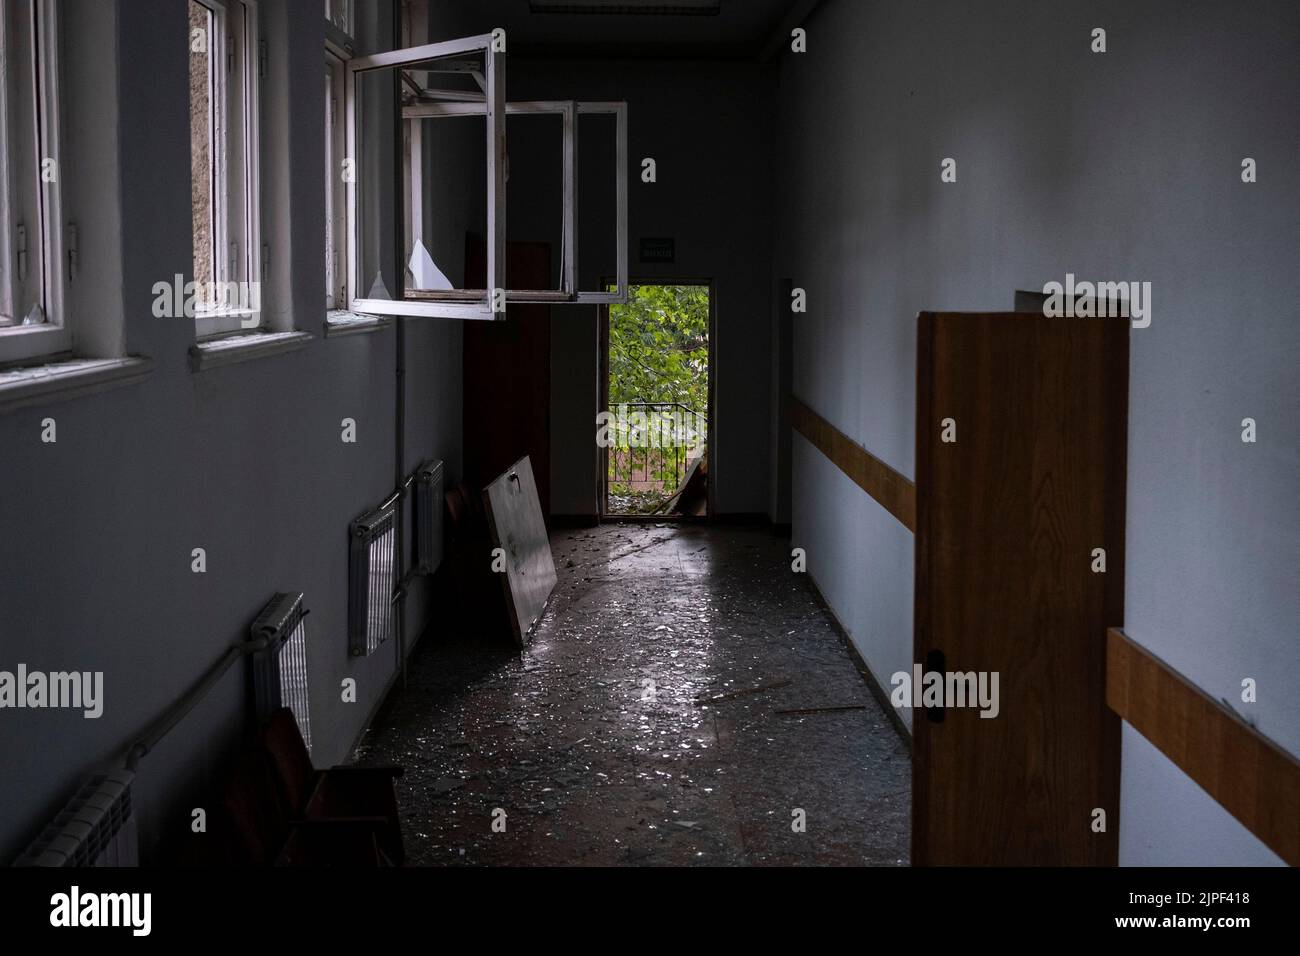 A corridor full of shattered glass on the ground at Petro Mohyla Black Sea National University in Mykolaiv. The university was struck by several Russian shelling at around 1:30 on August 16, as the mayor Oleksandr Sienkevych claimed no one was injured in the shelling. Russia's Ministry of Defense said earlier on social media that the university was a military strategic target with storage of heavy weapons. Stock Photo